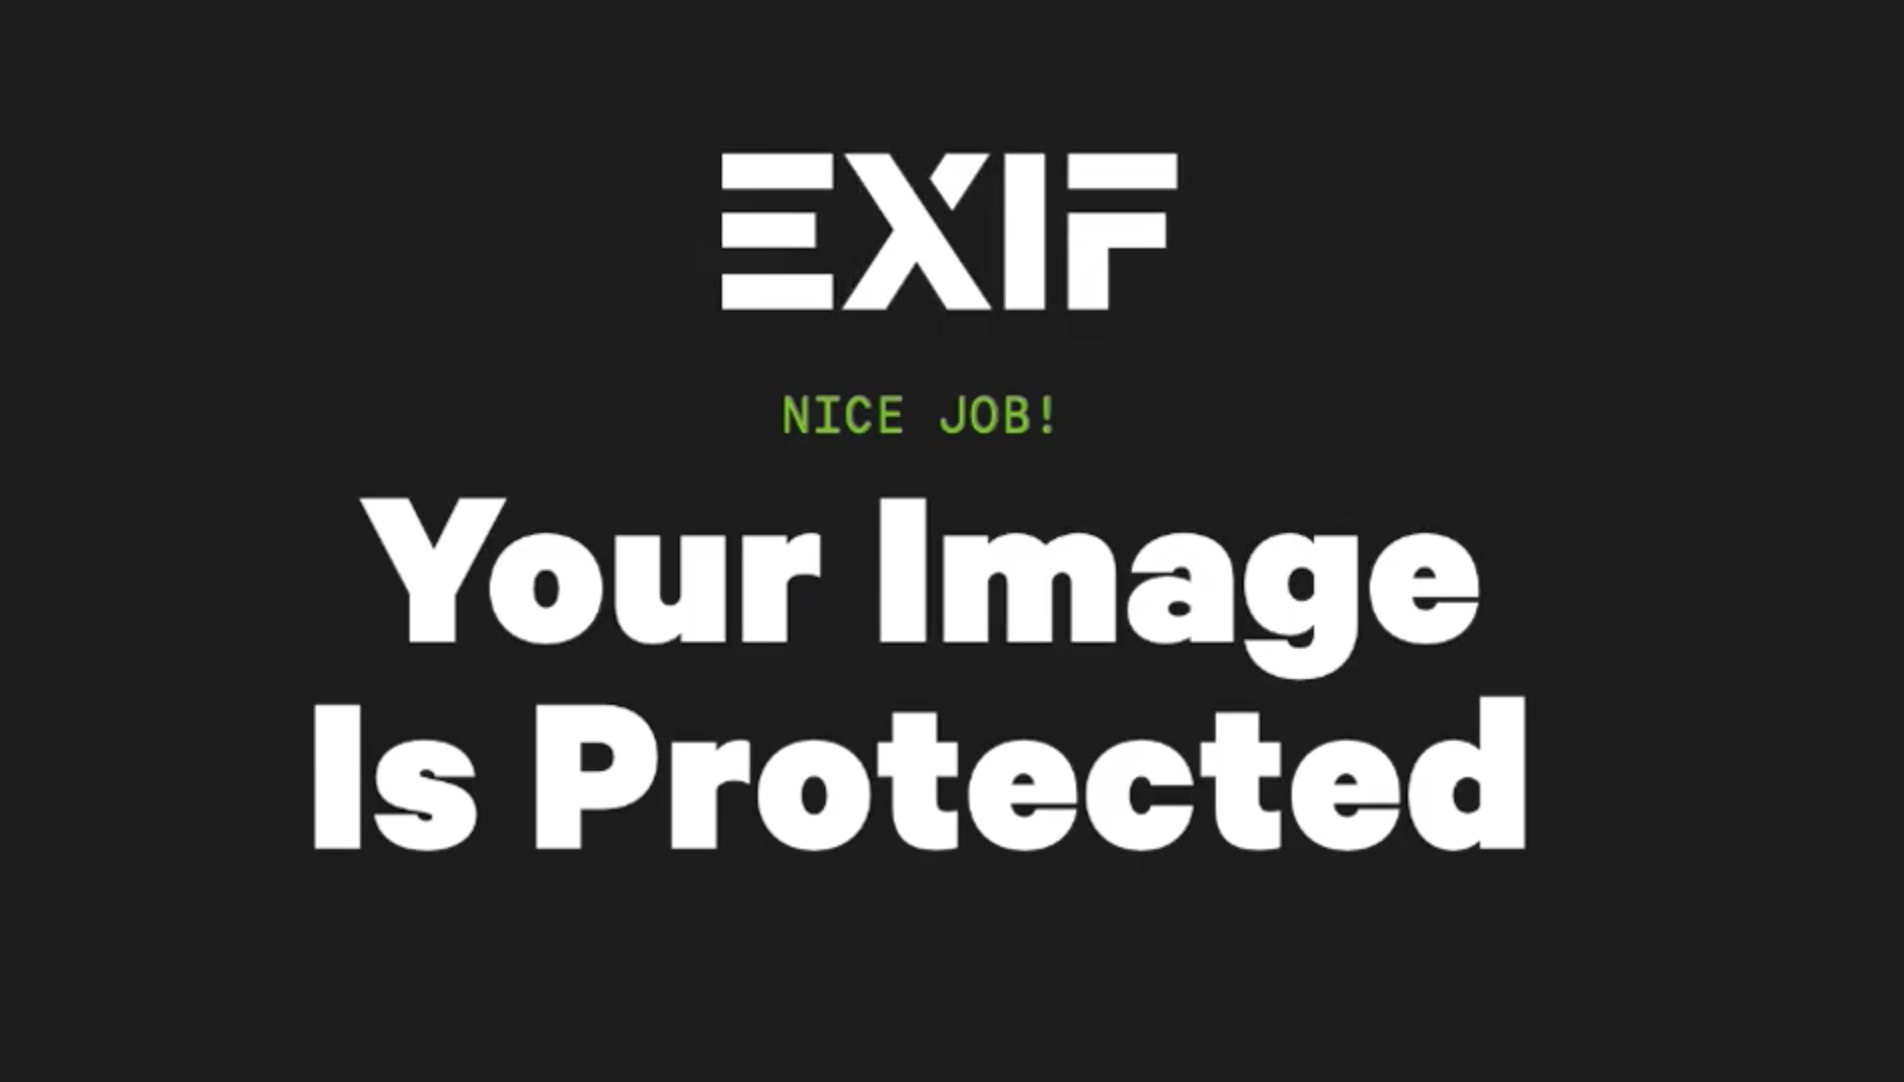 EXIF.co | Using Smart Watermarks And Embedded Exif Data To Protect Your Images